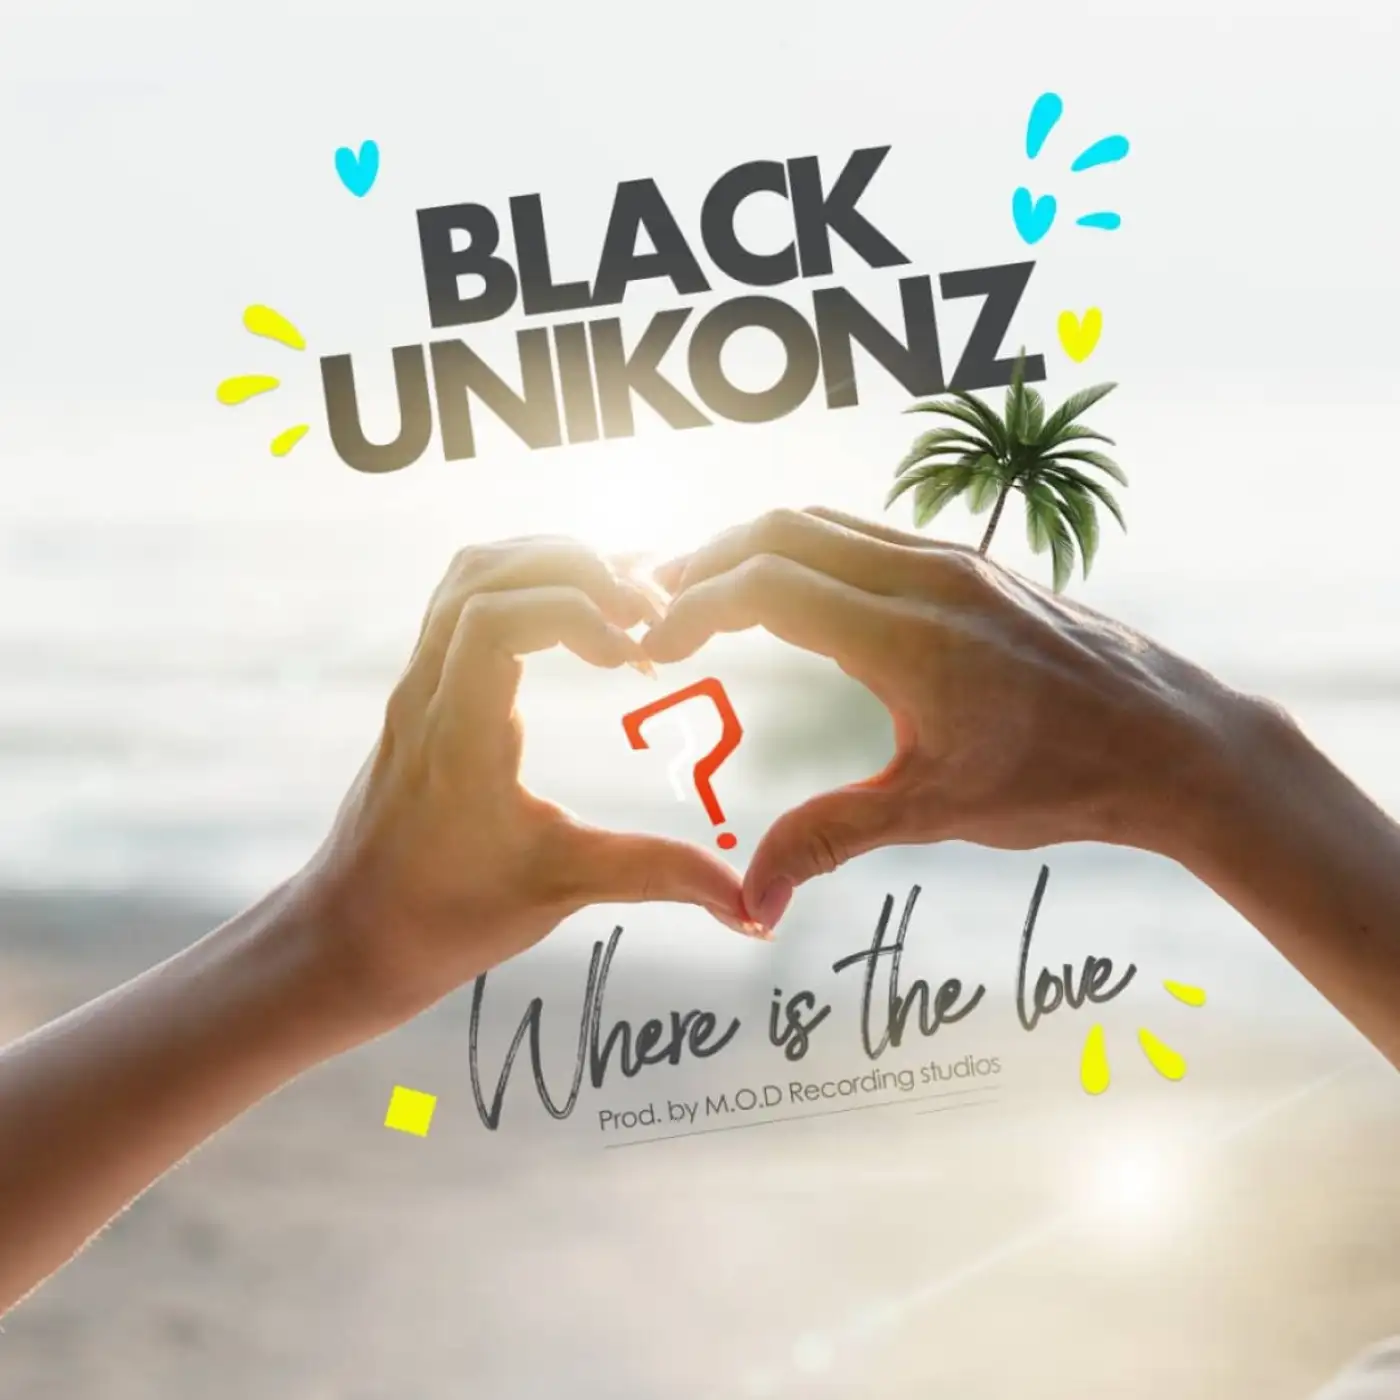 blackunikonz-where-is-the-love-mp3-download-mp3 download